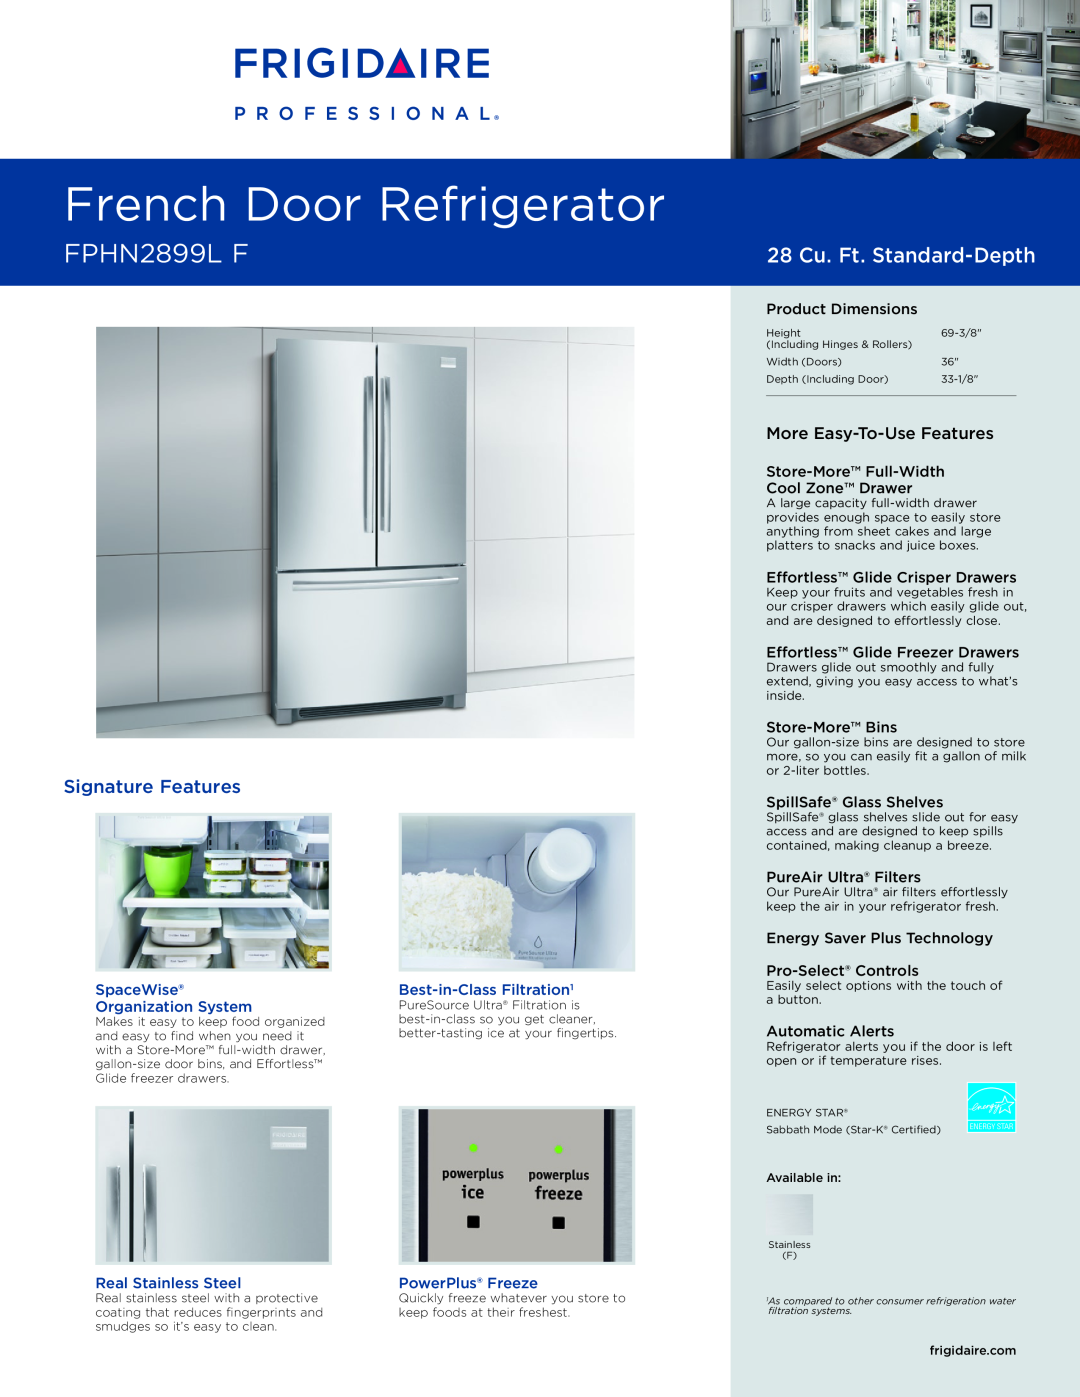 Frigidaire FPHN2899LF dimensions SpaceWise, Best-in-ClassFiltration1, Organization System, Real Stainless Steel 